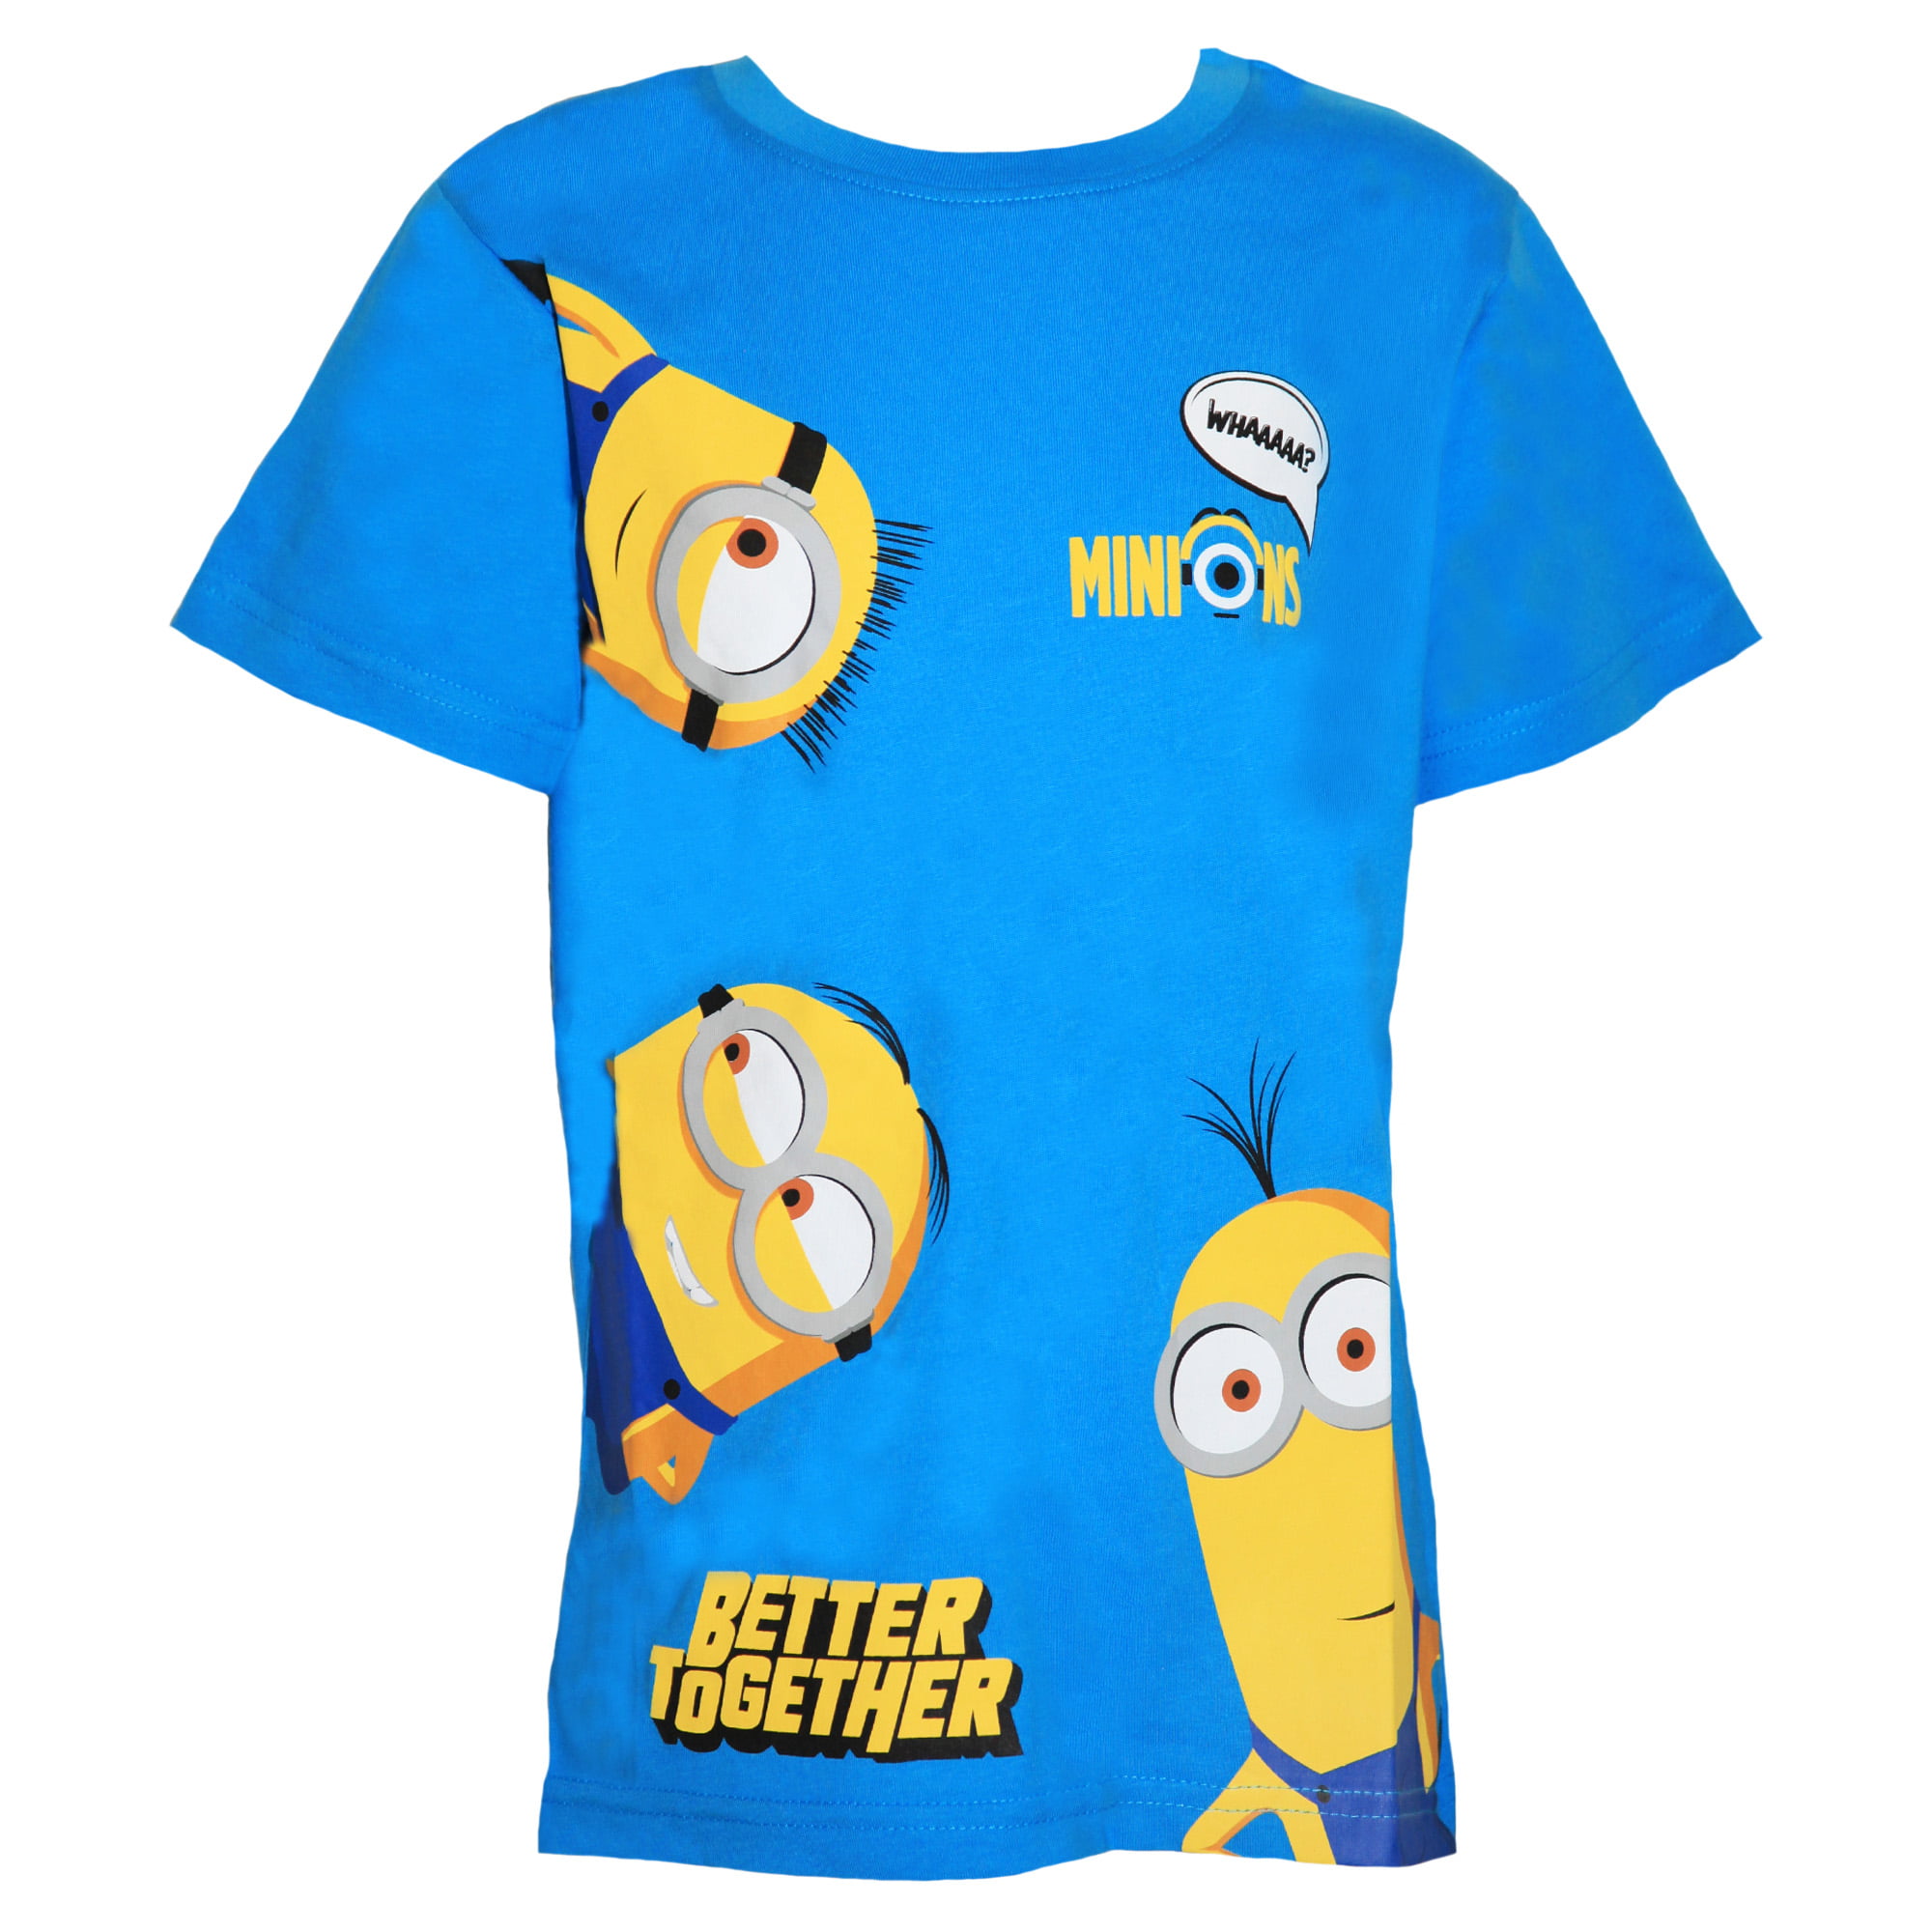 Officially Licensed DESPICABLE ME MINIONS BLUE T-SHIRT Short Sleeve AGE 6-12 YRS 